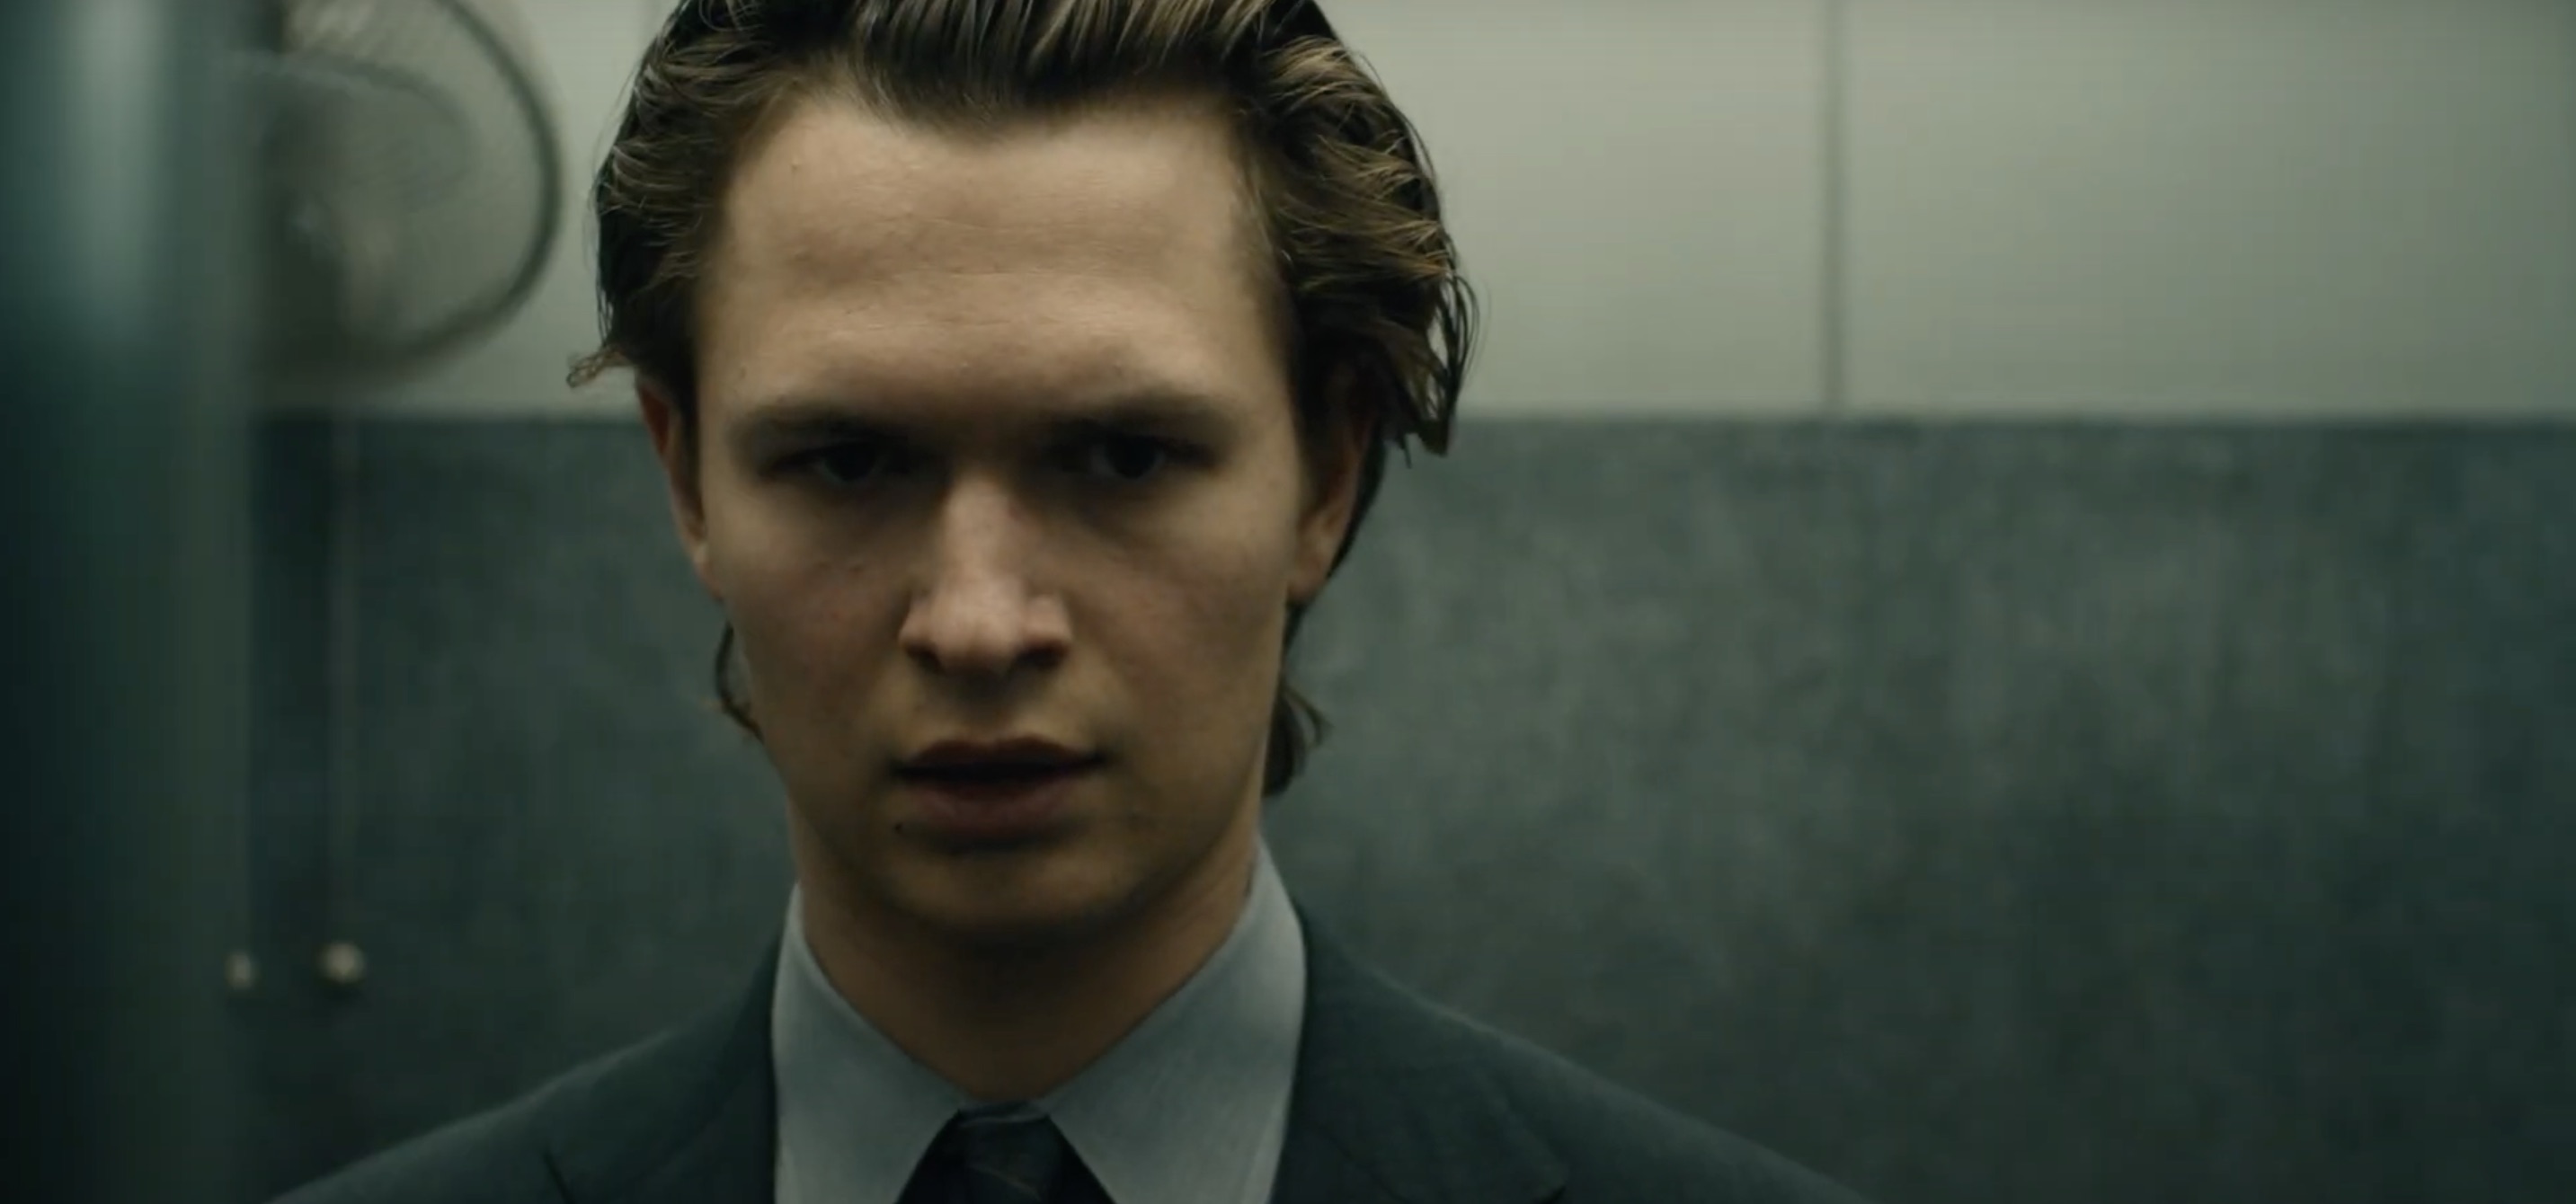 Tokyo Vice Cast on HBO Max - Ansel Elgort as Jake Adelstein